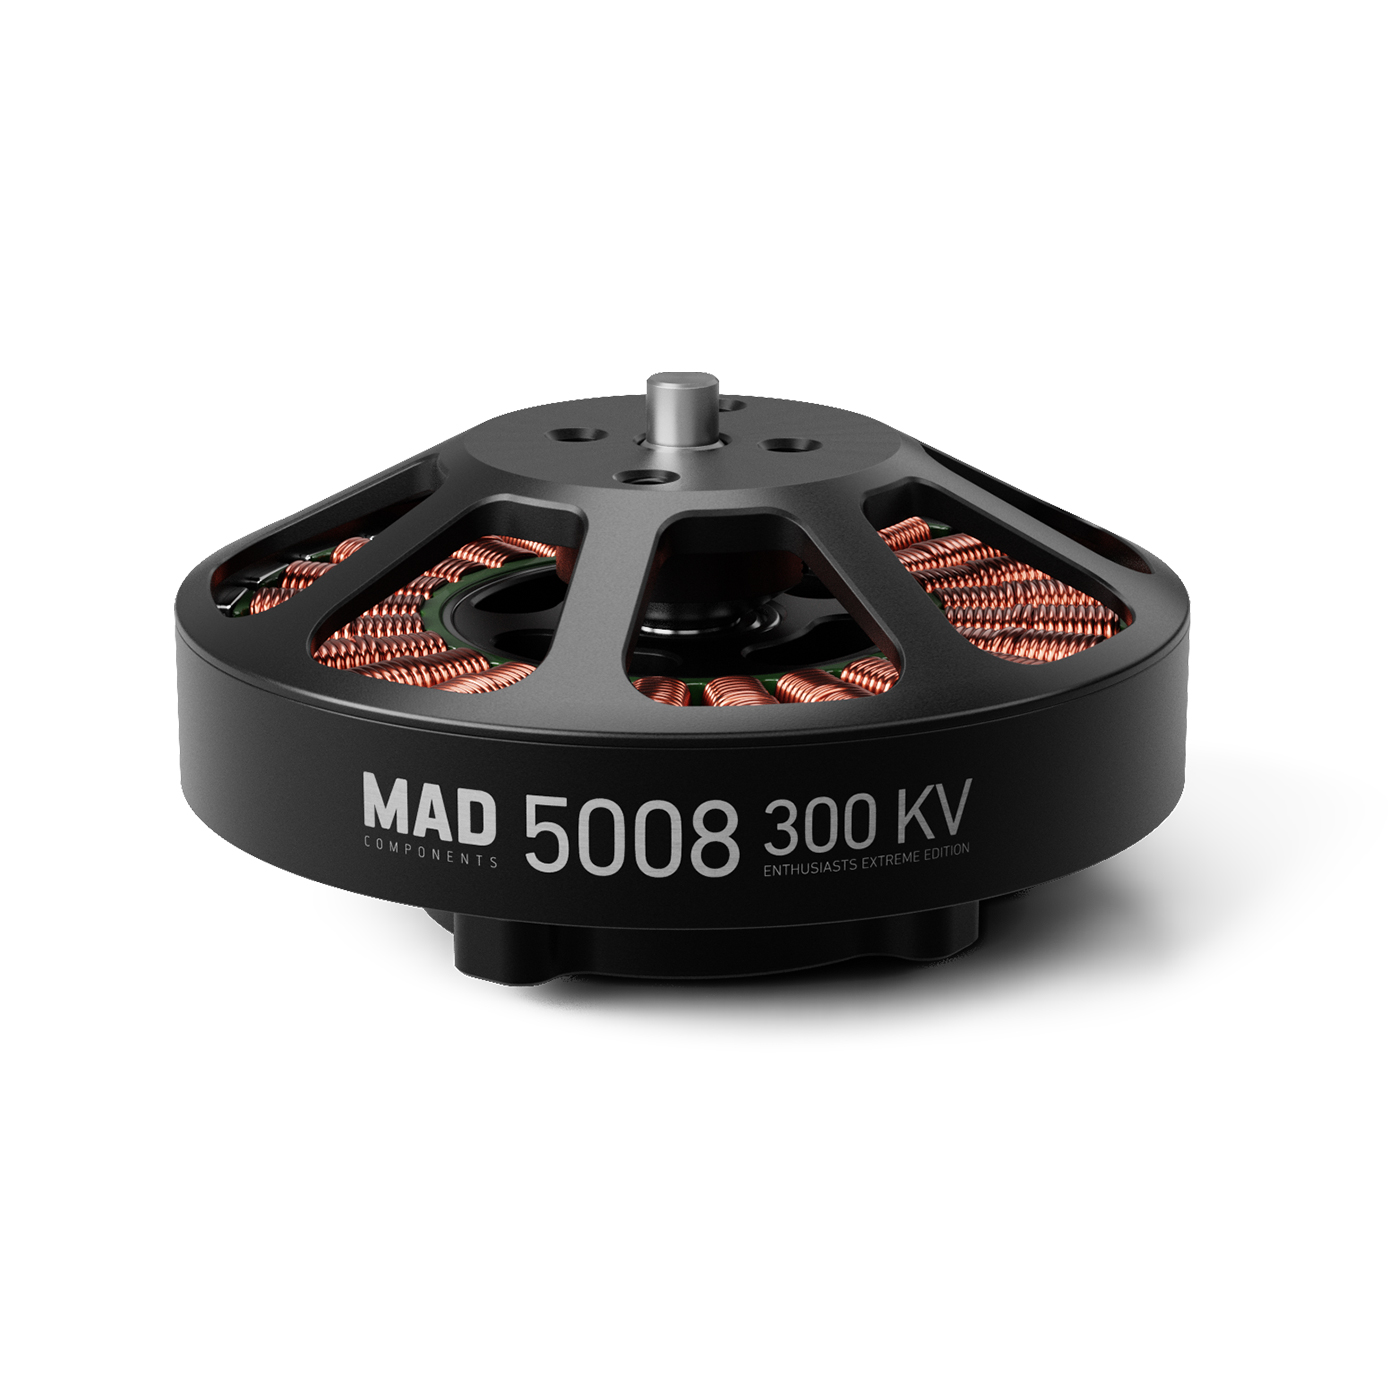 MAD 5008 EEE V2.0 for the long-range inspection drone mapping drone surveying drone quadcopter hexcopter mulitirotor